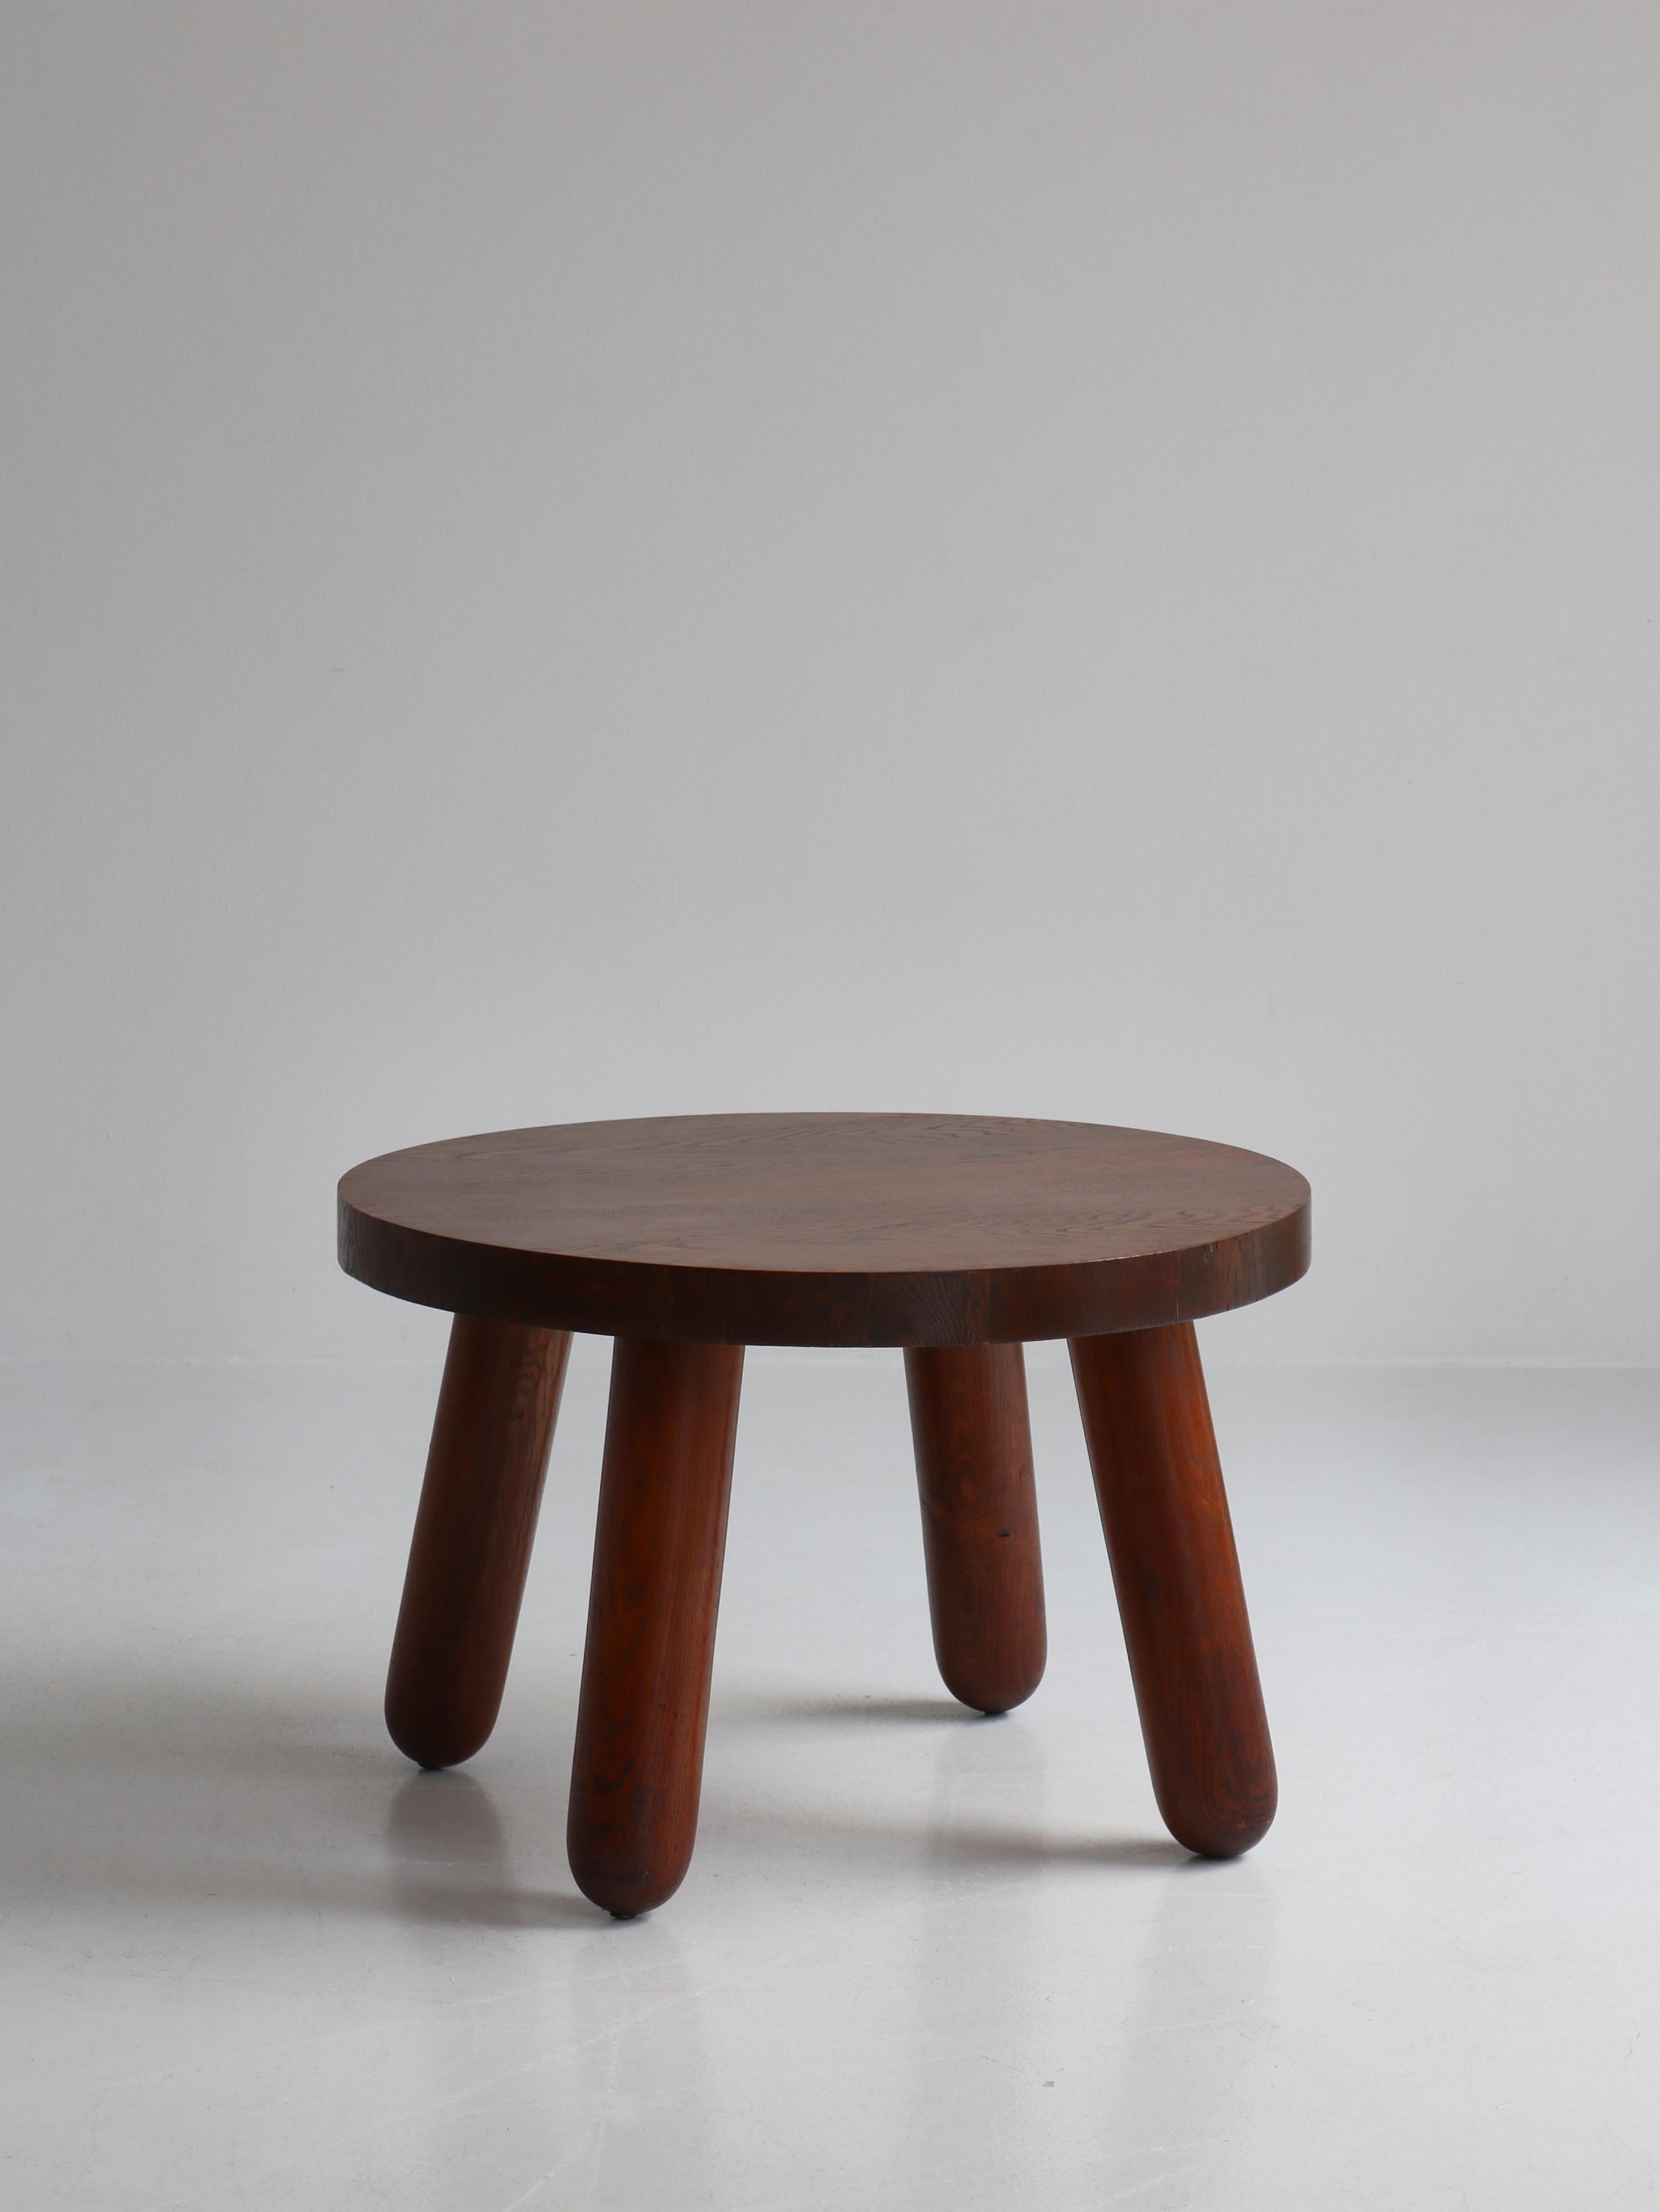 Chunky Danish Modern Side Table in Stained Oak by Otto Færge, Denmark, 1940s In Good Condition For Sale In Odense, DK